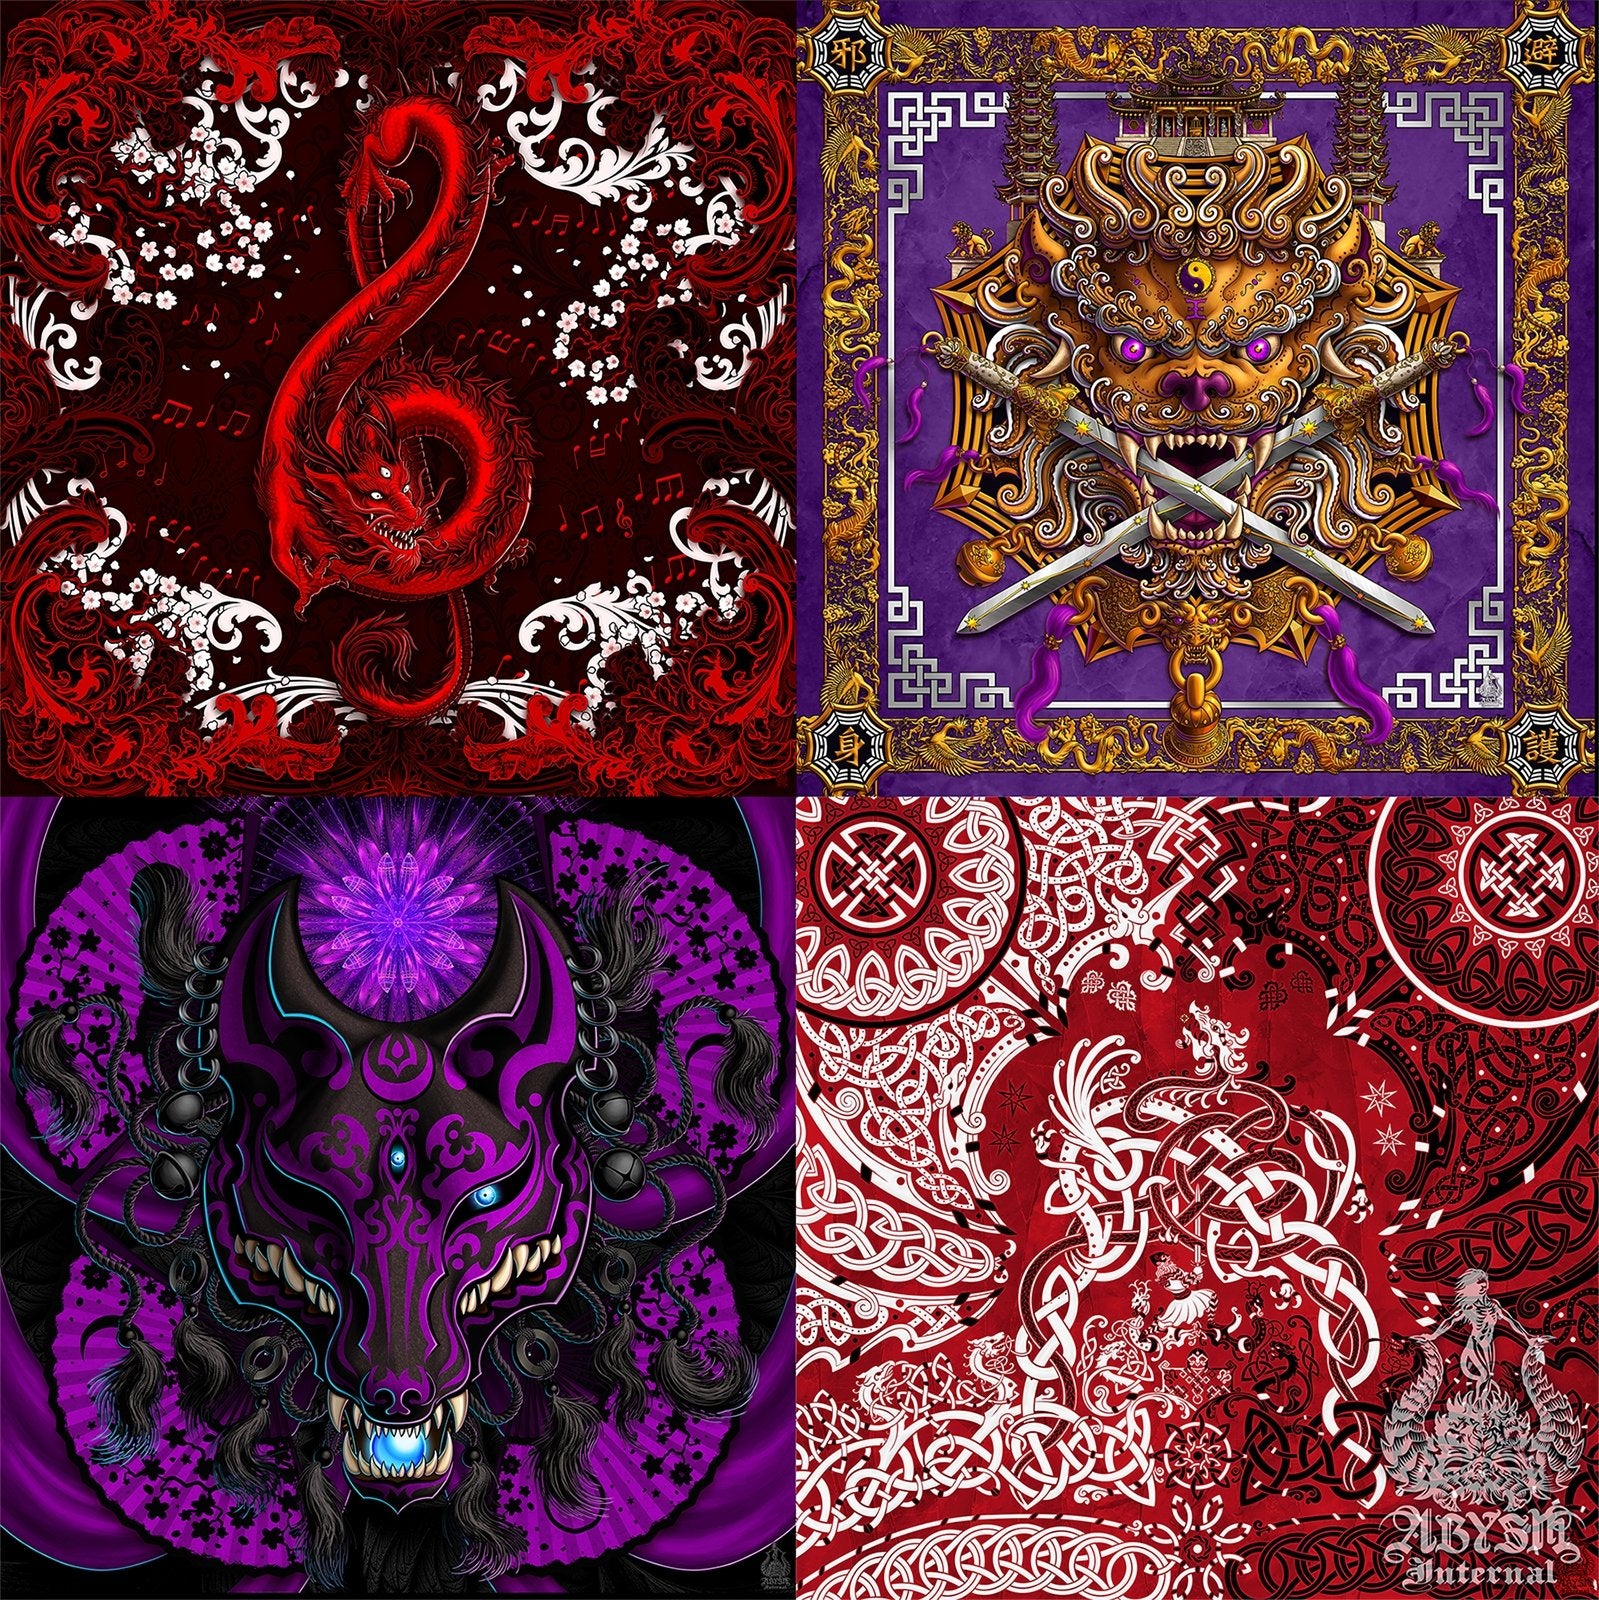 Fantasy Graphic Art for Board Games, Video Games, Mobile Games, Packaging Art, Seamless Patterns - Graphic Design Services